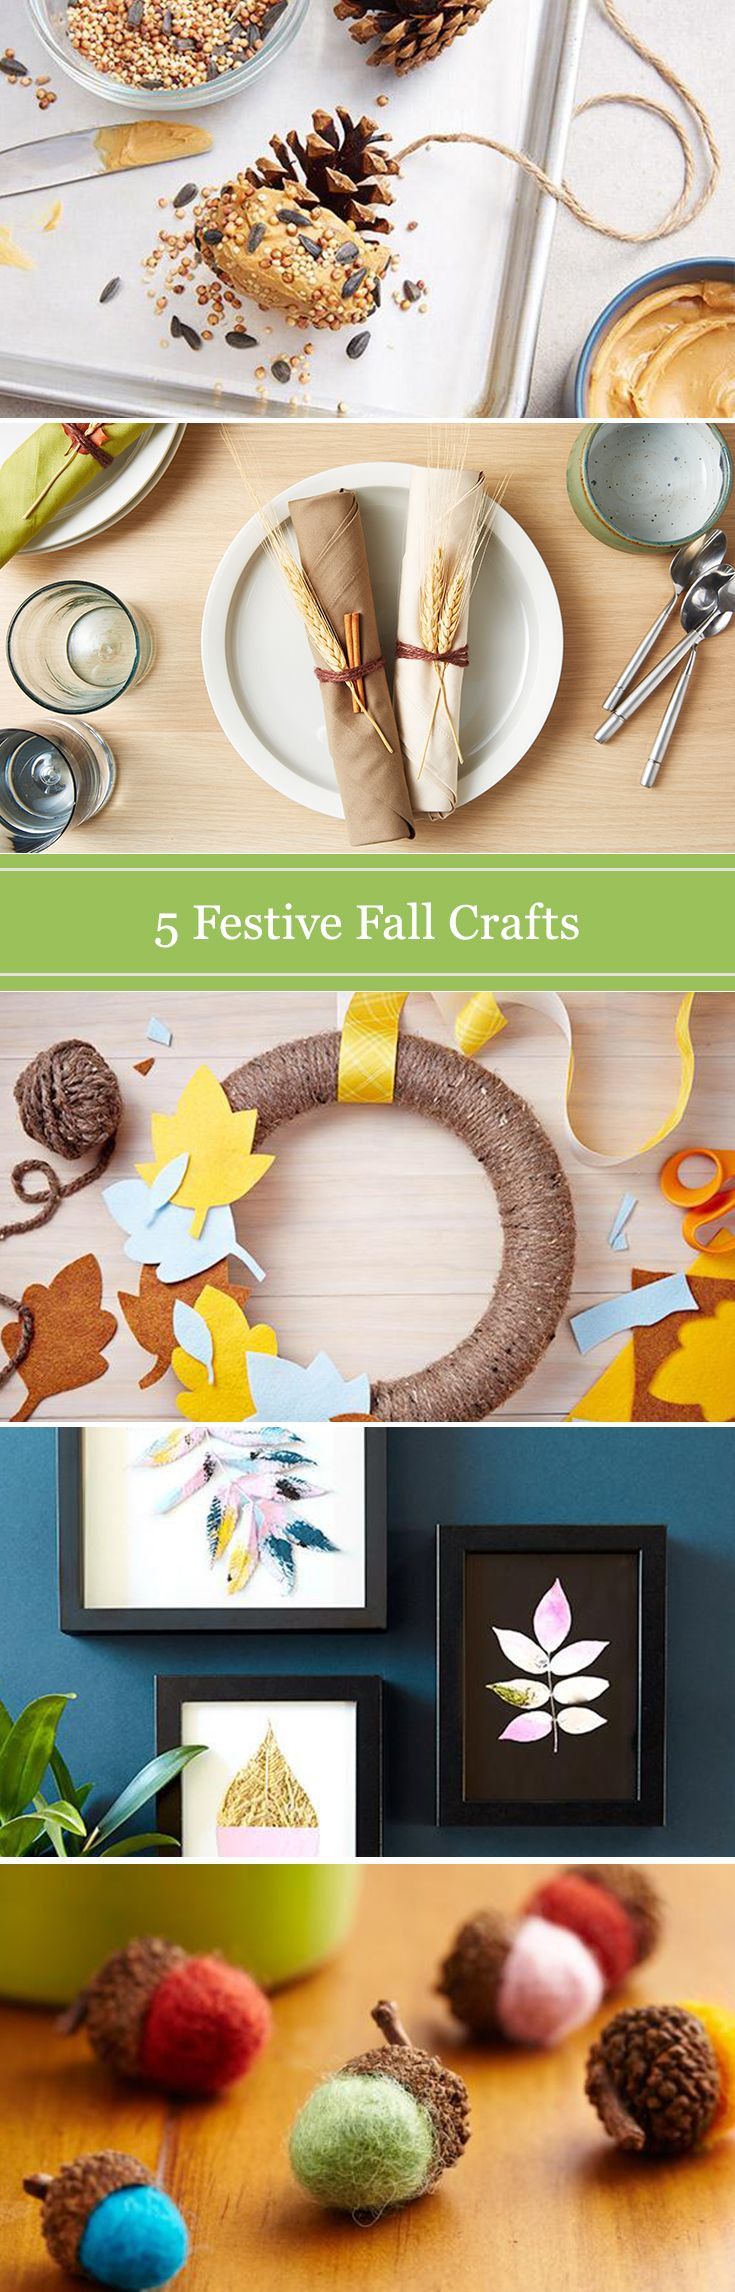 Simple Craft Ideas For Adults
 51 best Craft Ideas for Adults images on Pinterest